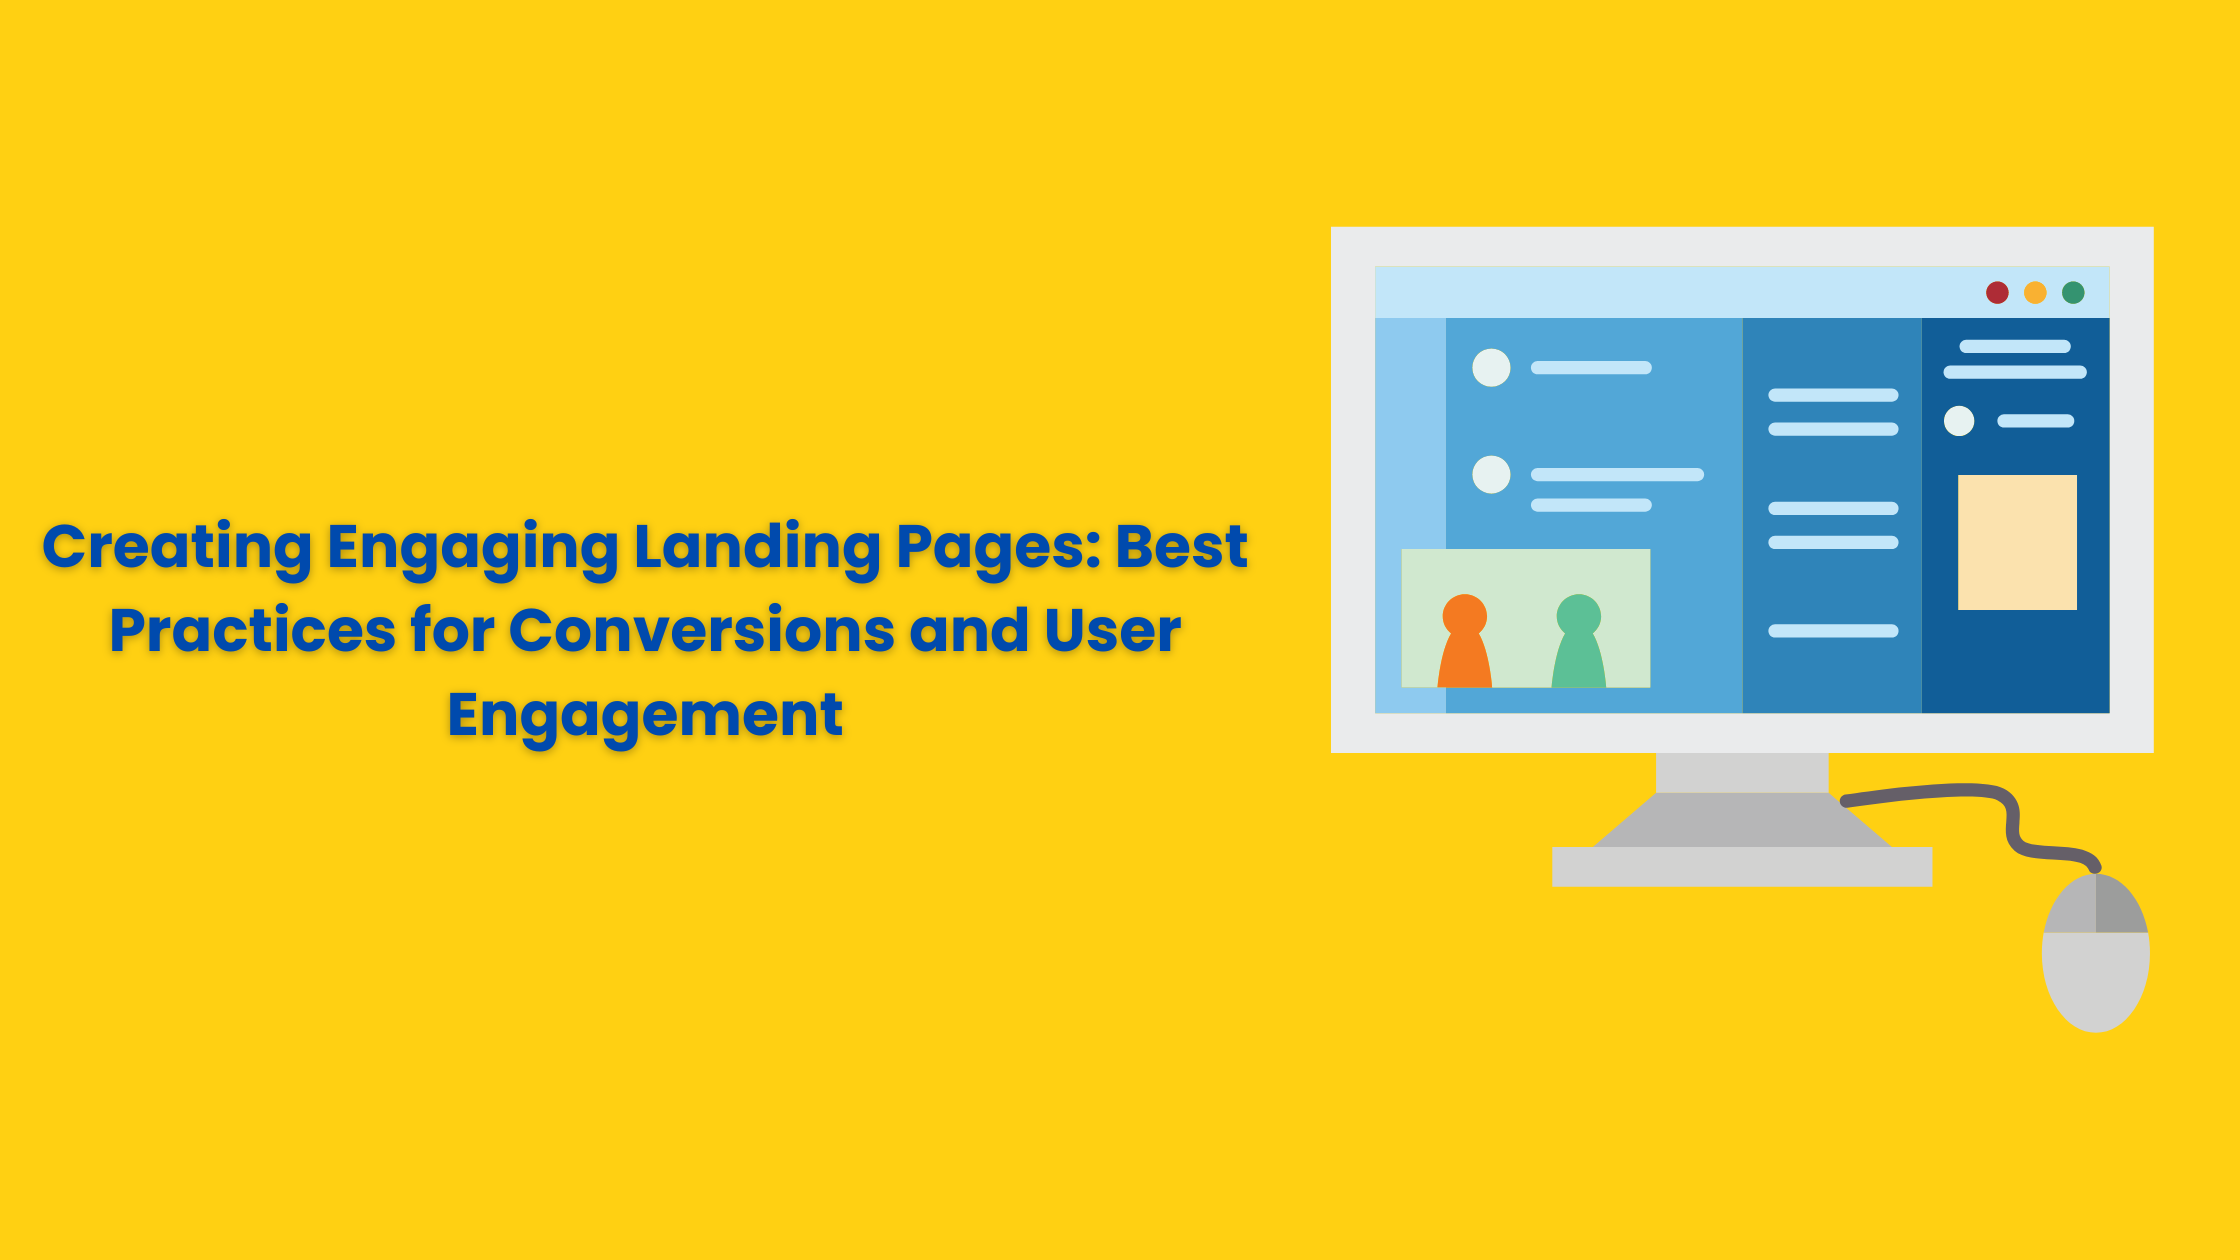 Creating Engaging Landing Pages